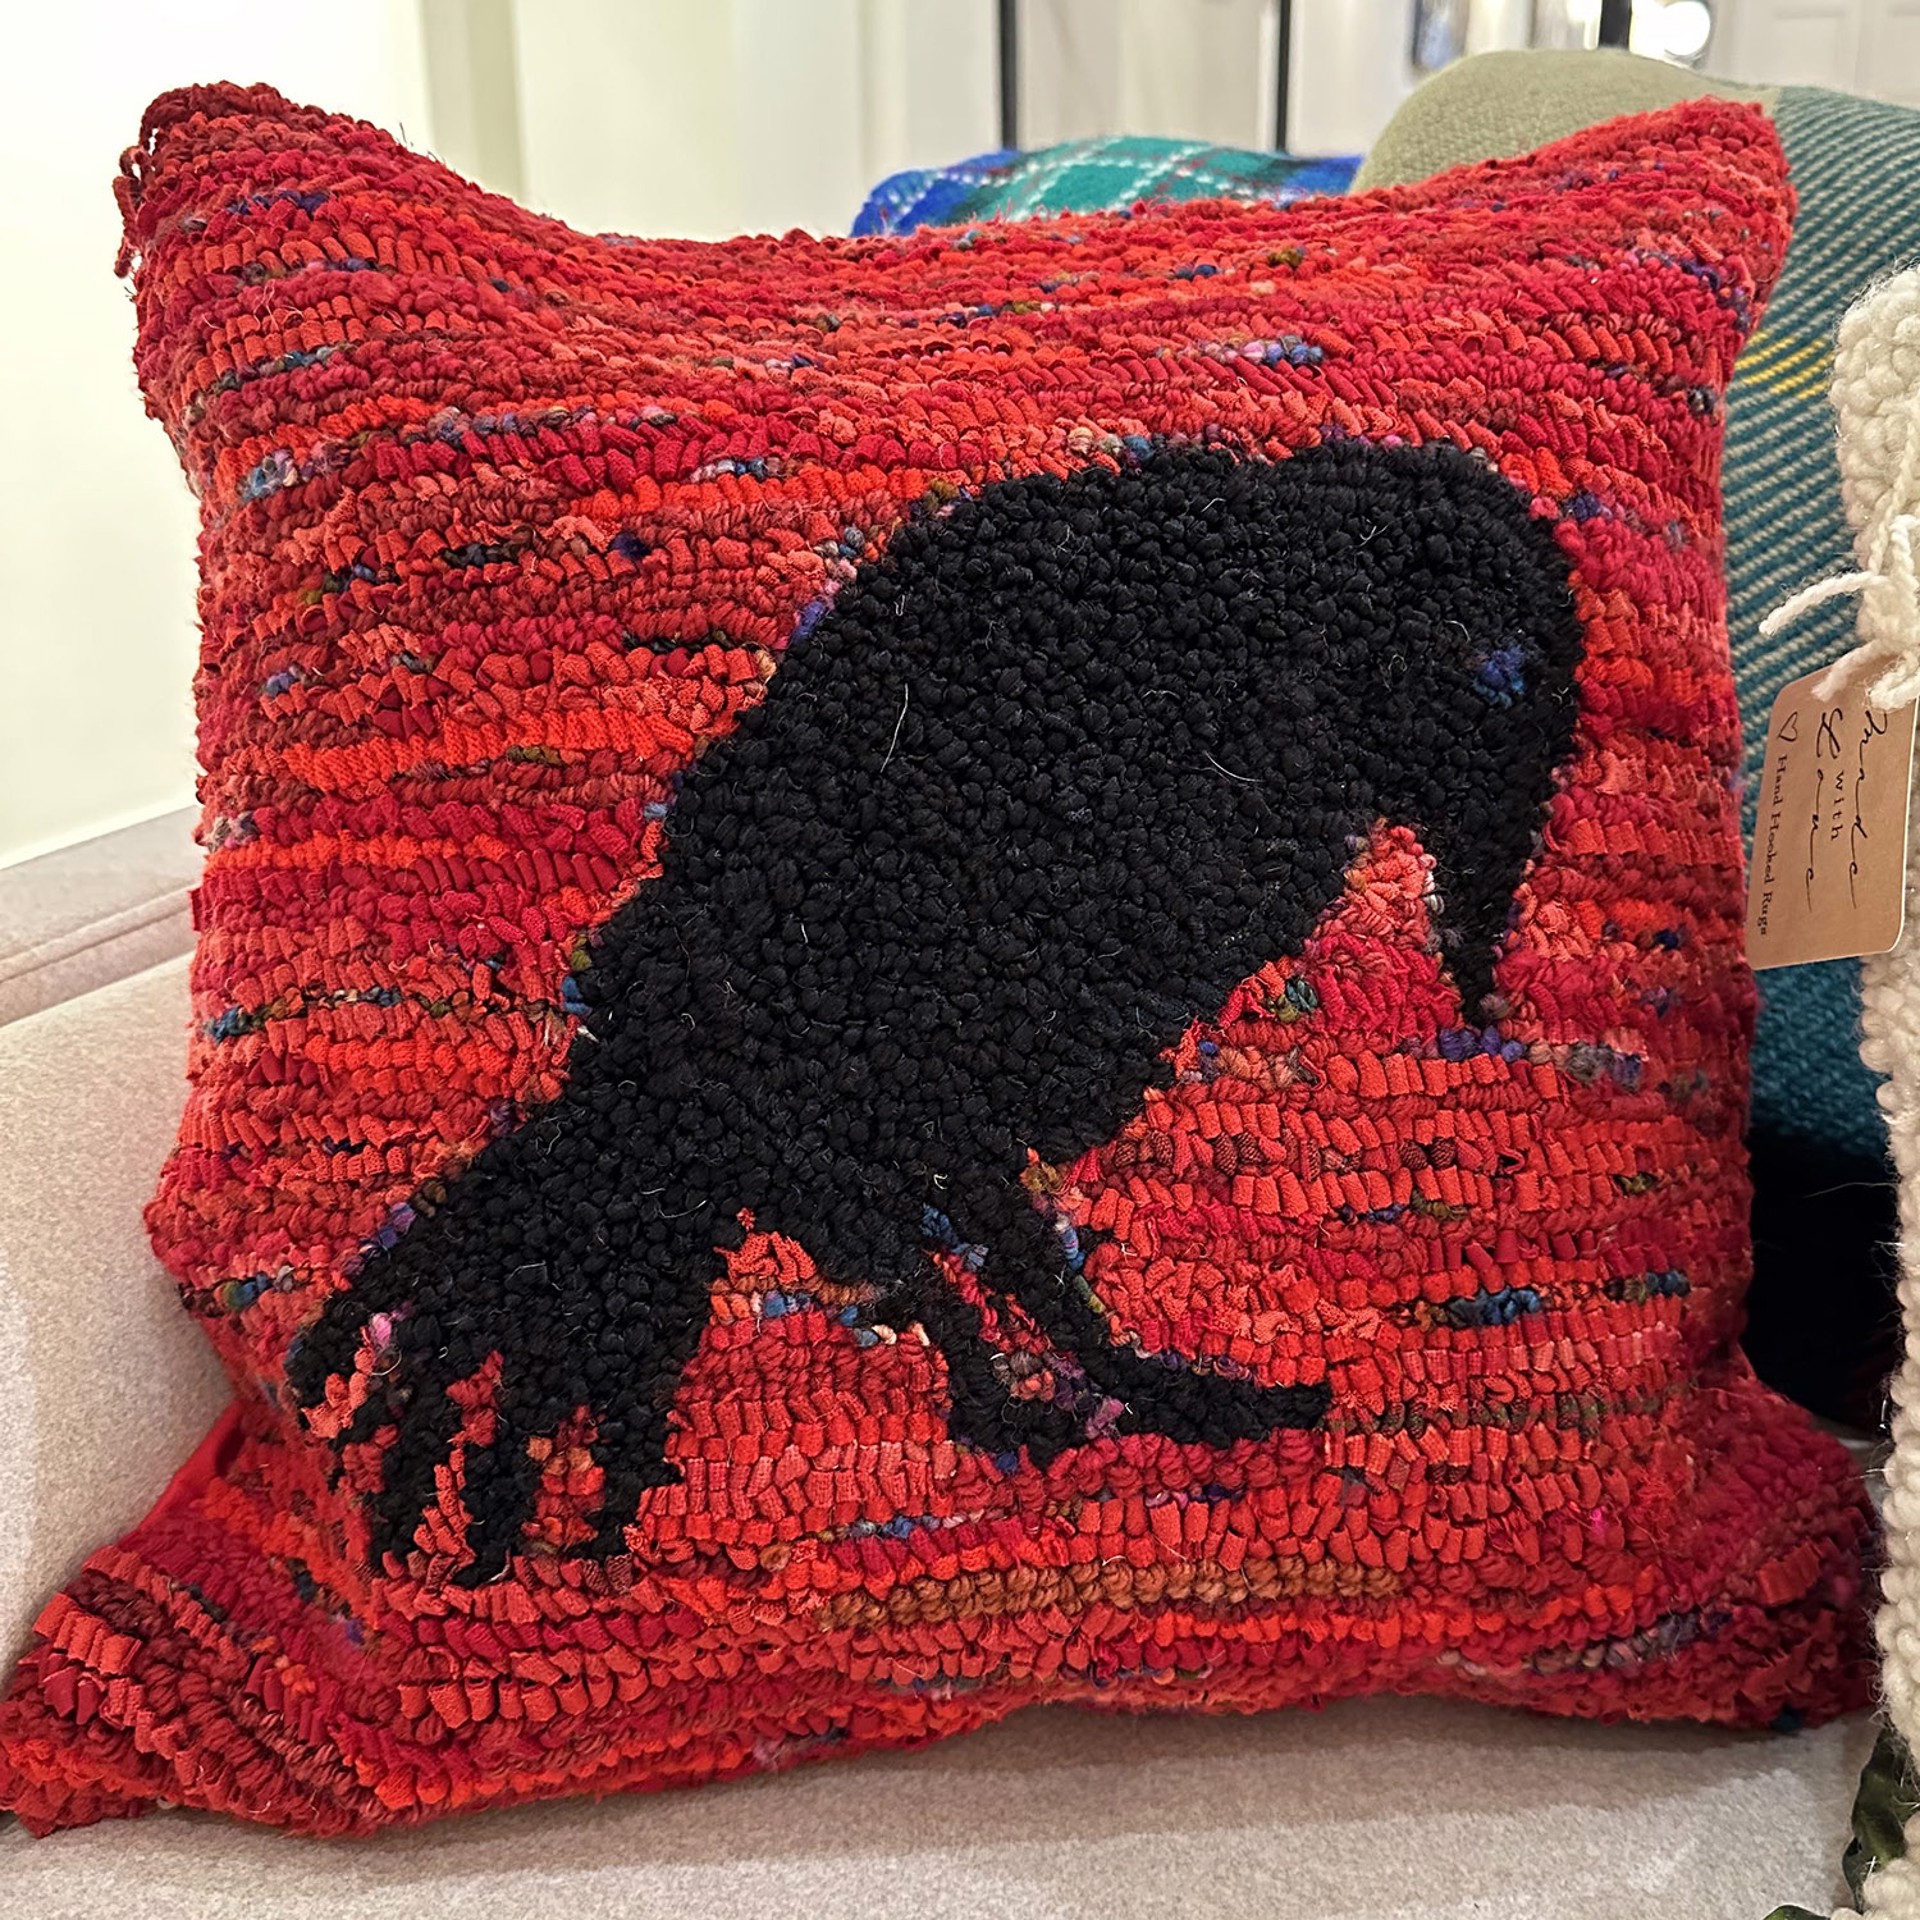 Crow Pillow 2 by Linda Smith